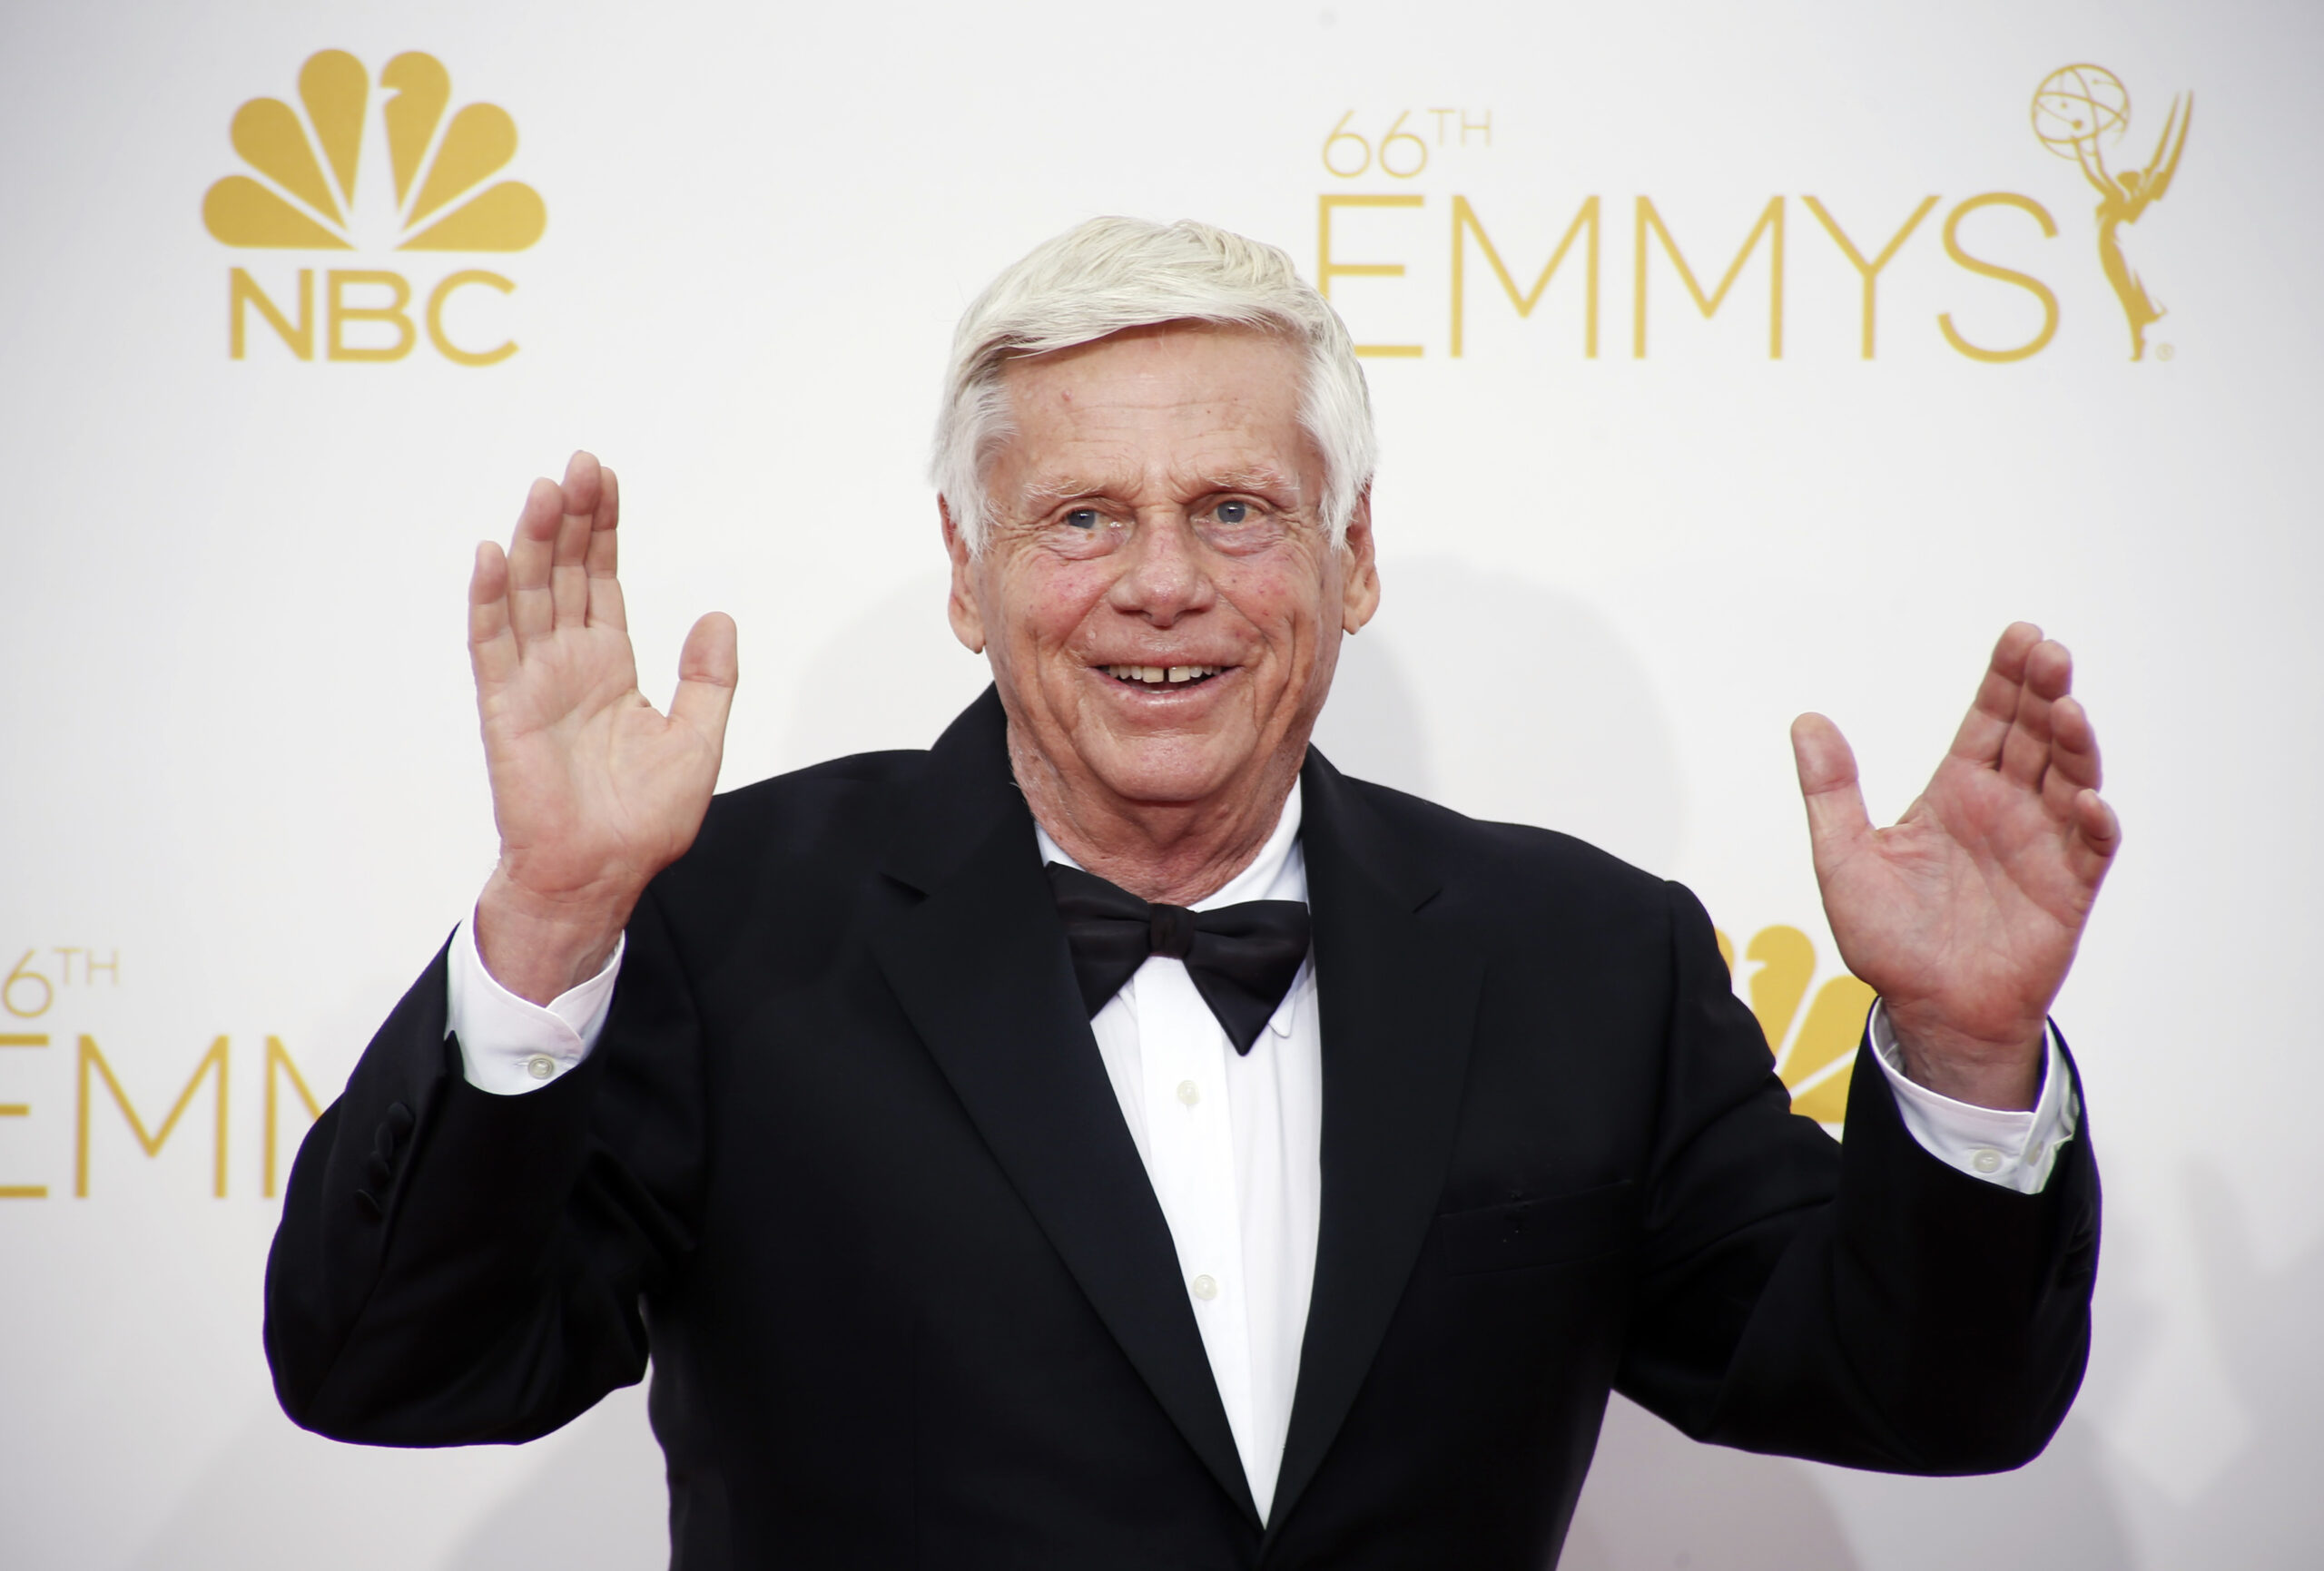 Robert Morse arrives at the 66th Primetime Emmy Awards in Los Angeles